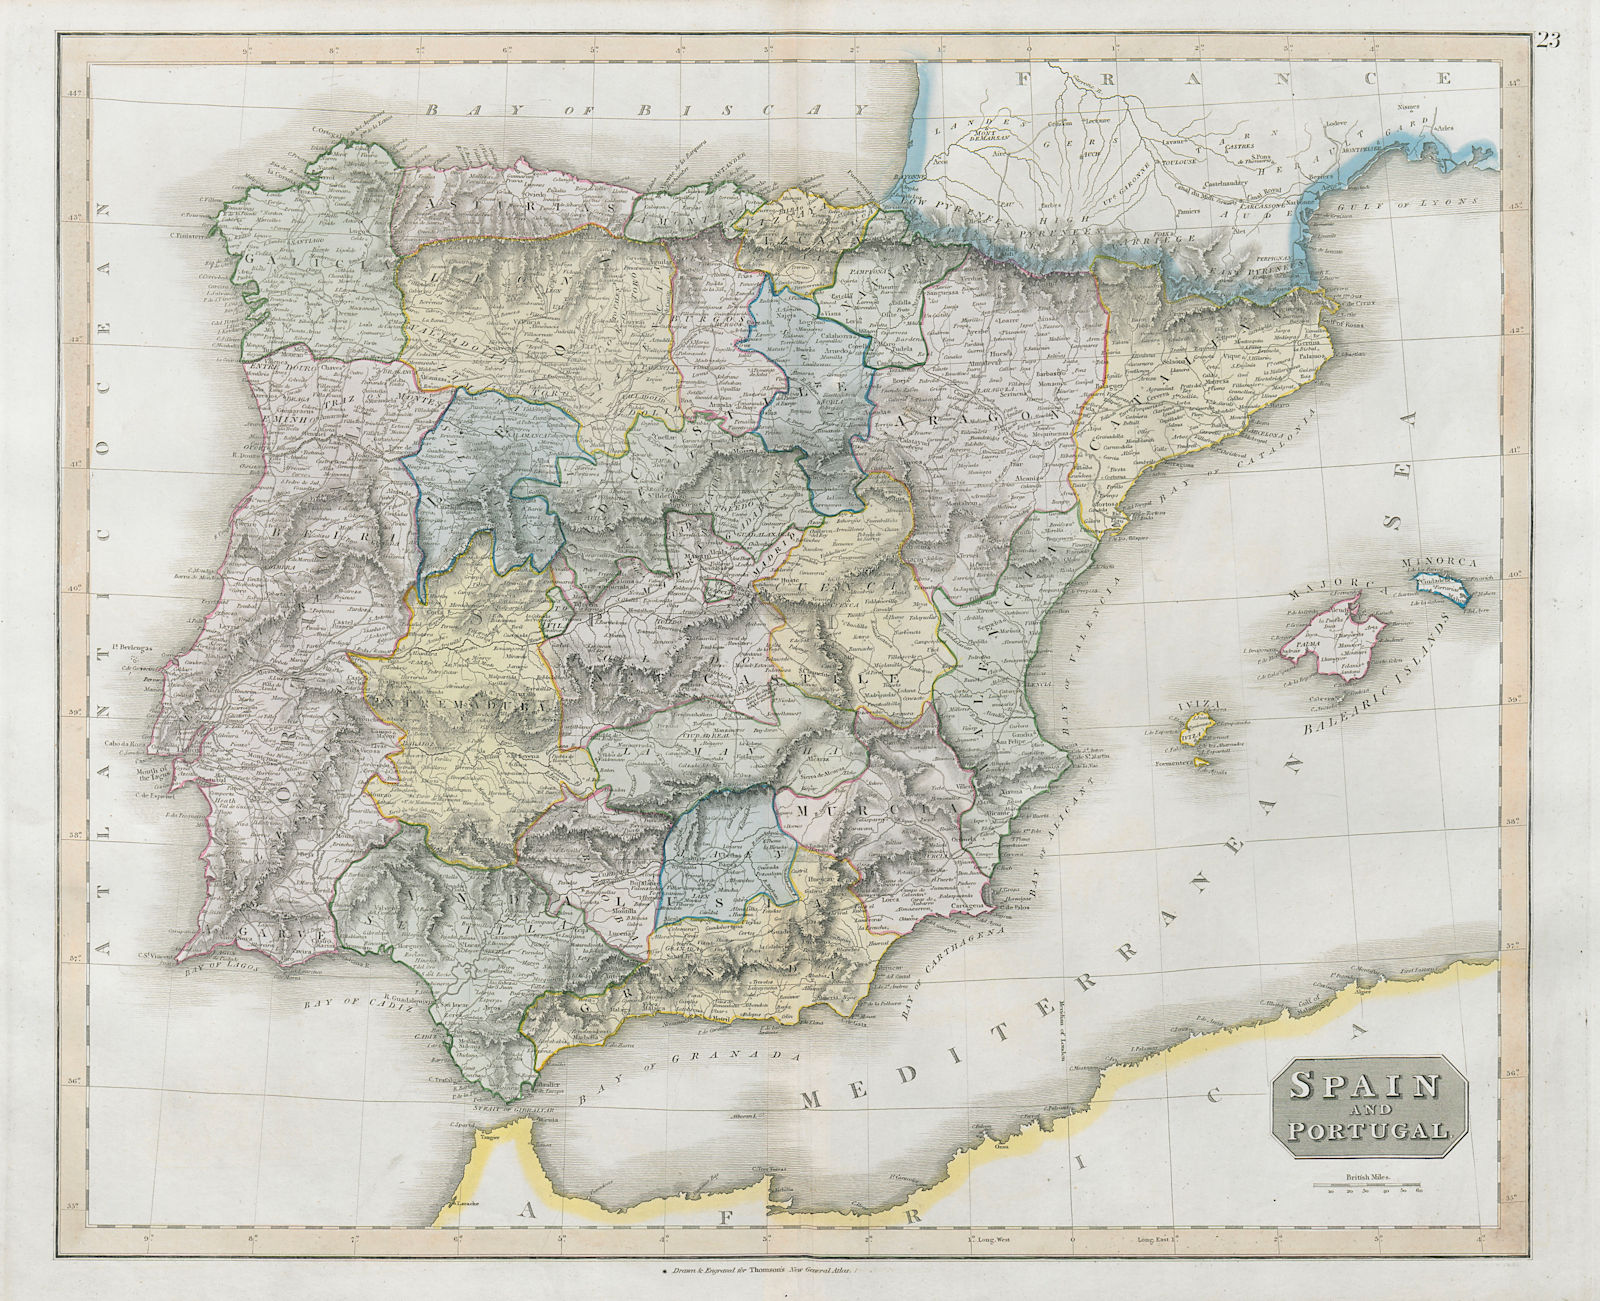 Associate Product "Spain and Portugal" by John Thomson. Provinces. Iberia 1830 old antique map